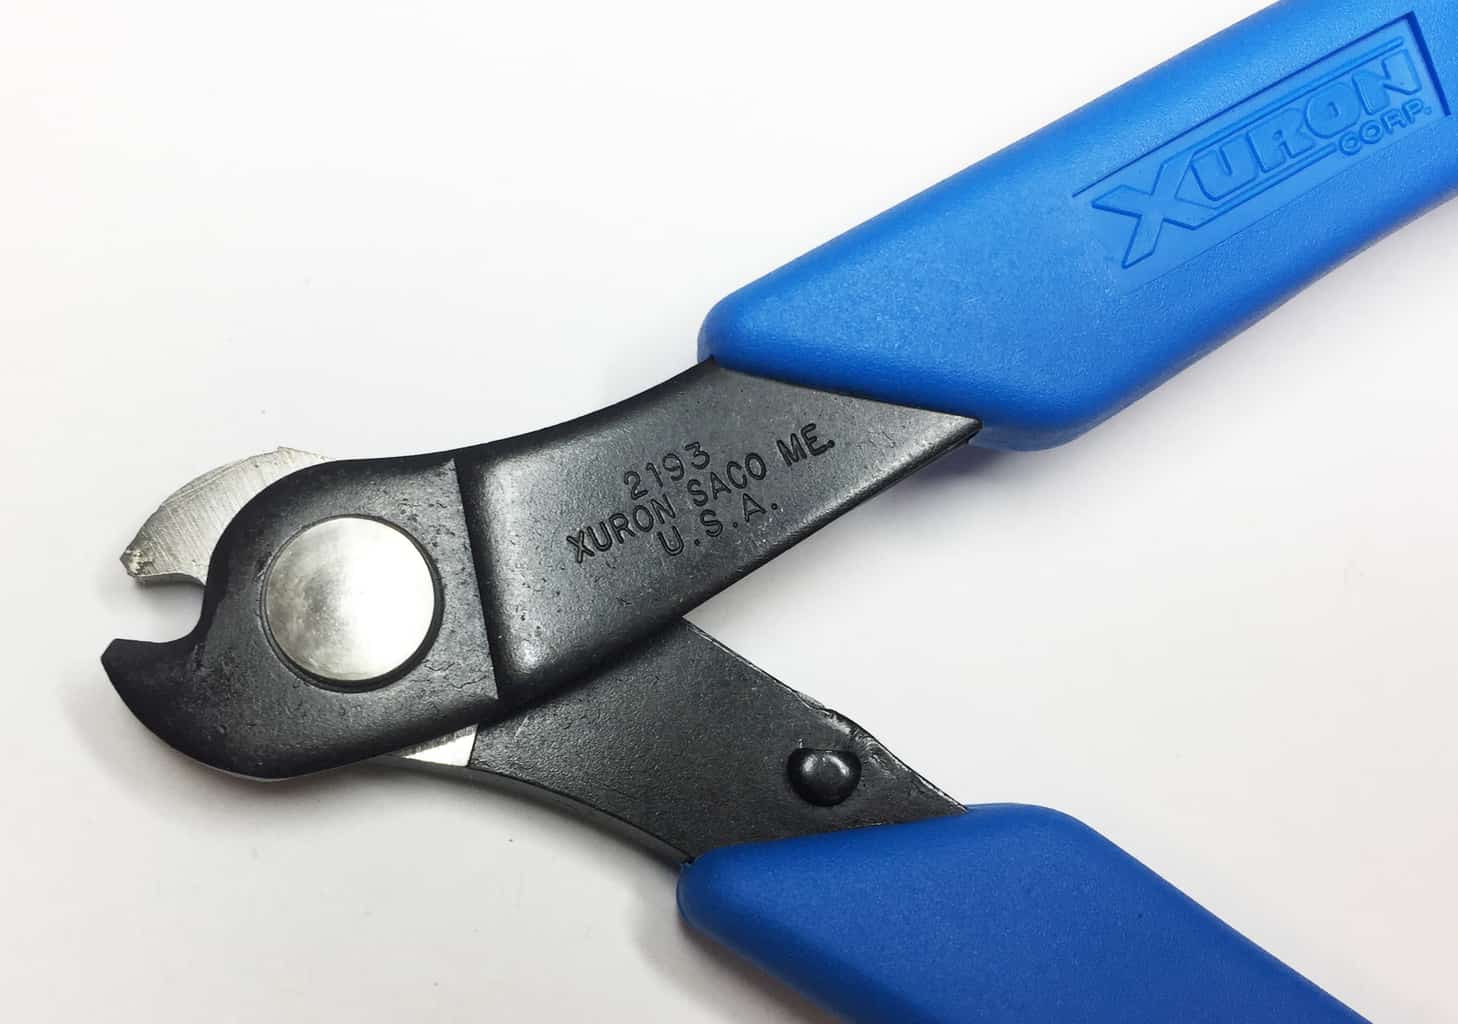 Xuron® Model 2193 is specifically designed to cut hard wire